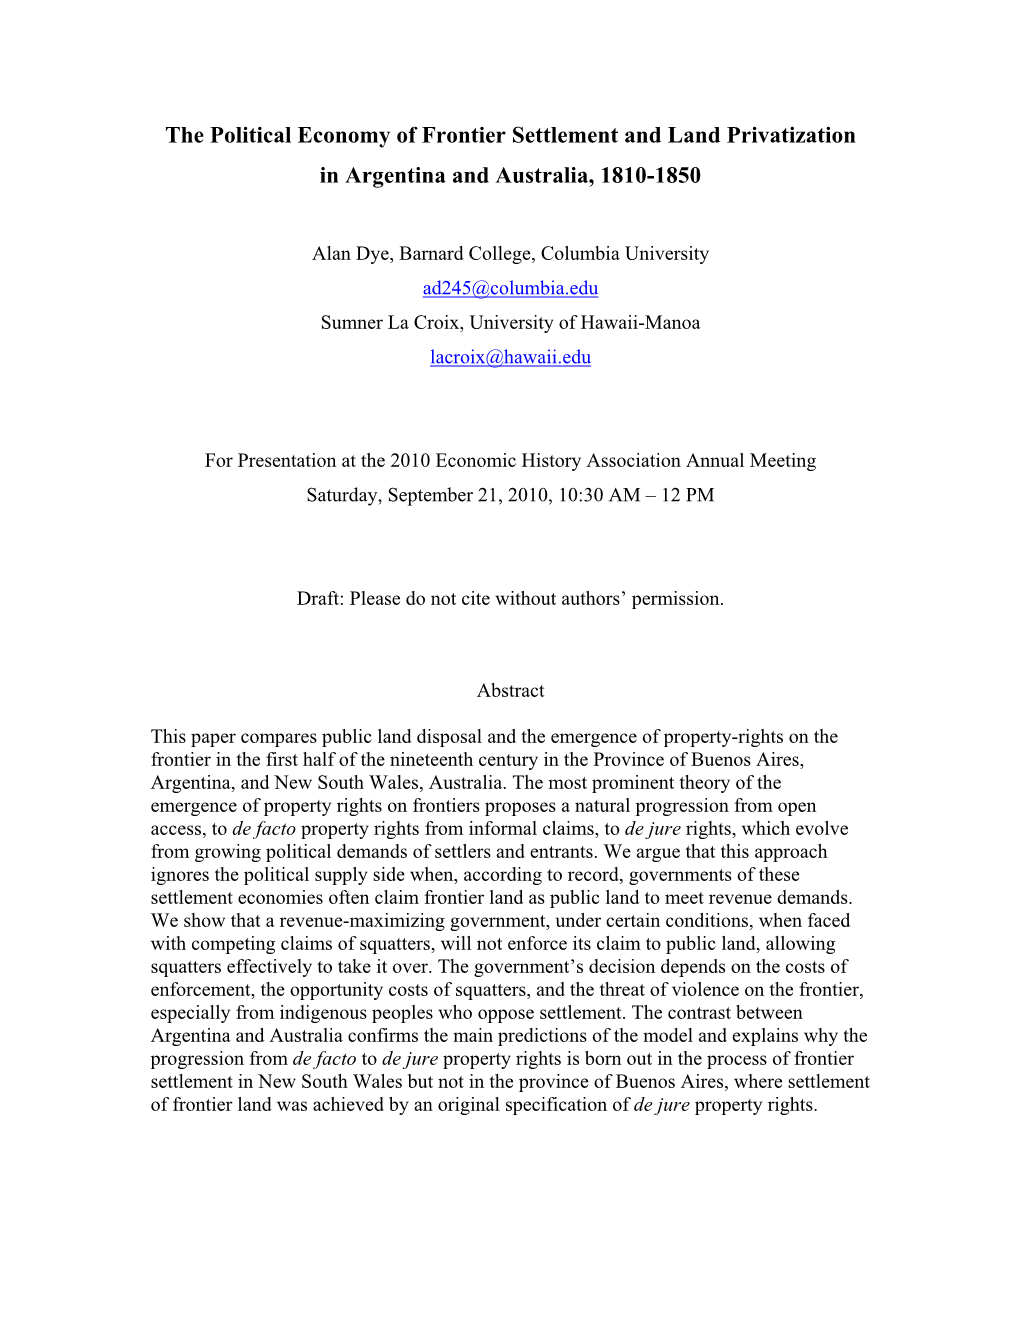 The Political Economy of Frontier Settlement and Land Privatization in Argentina and Australia, 1810-1850